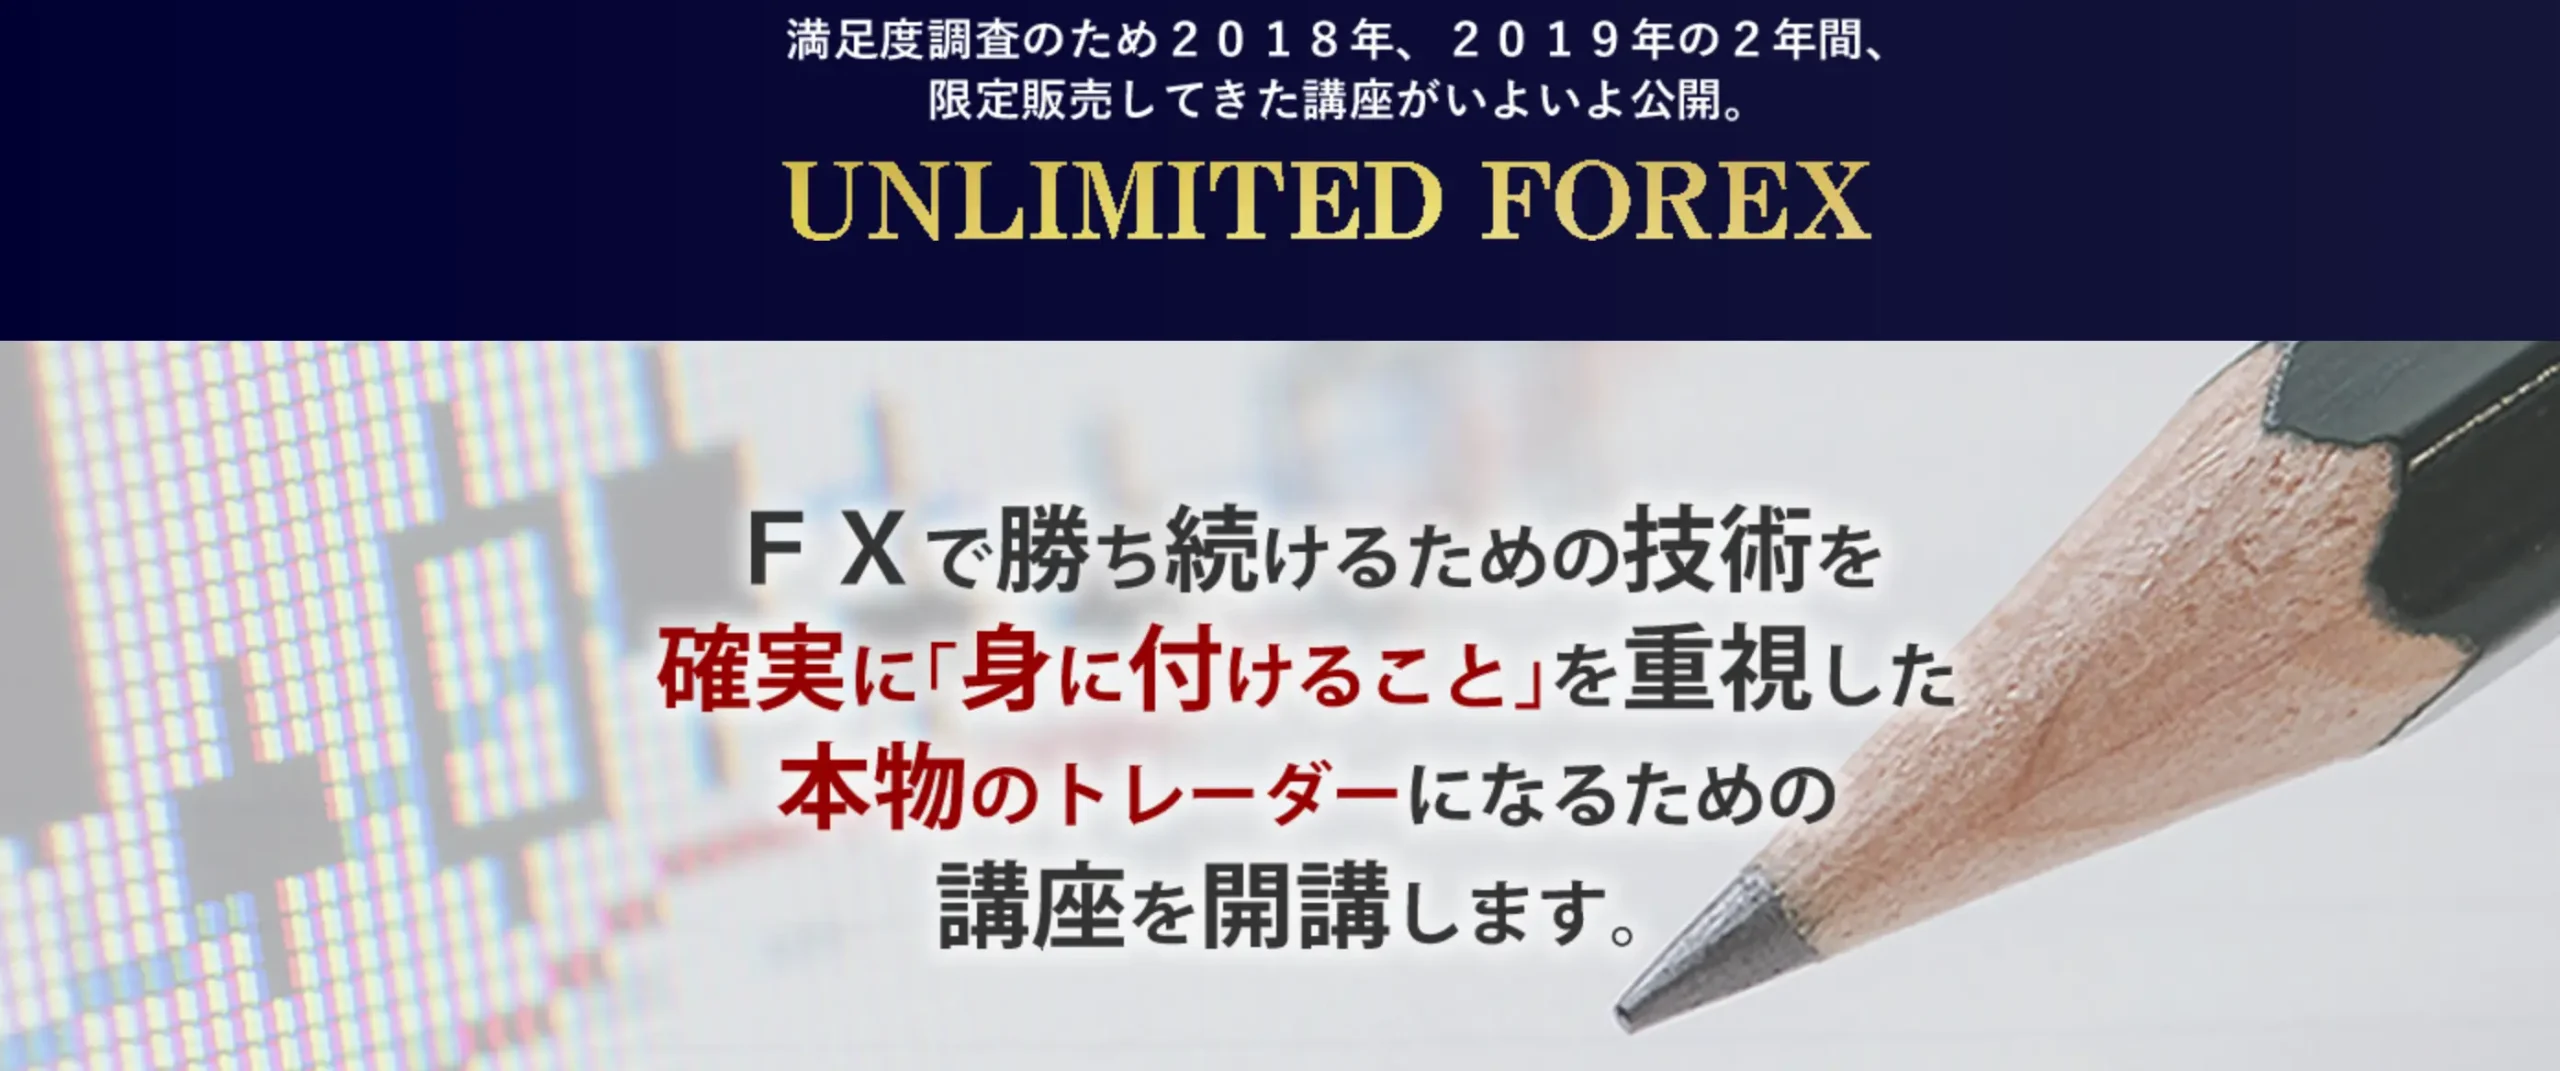 unlimited fx